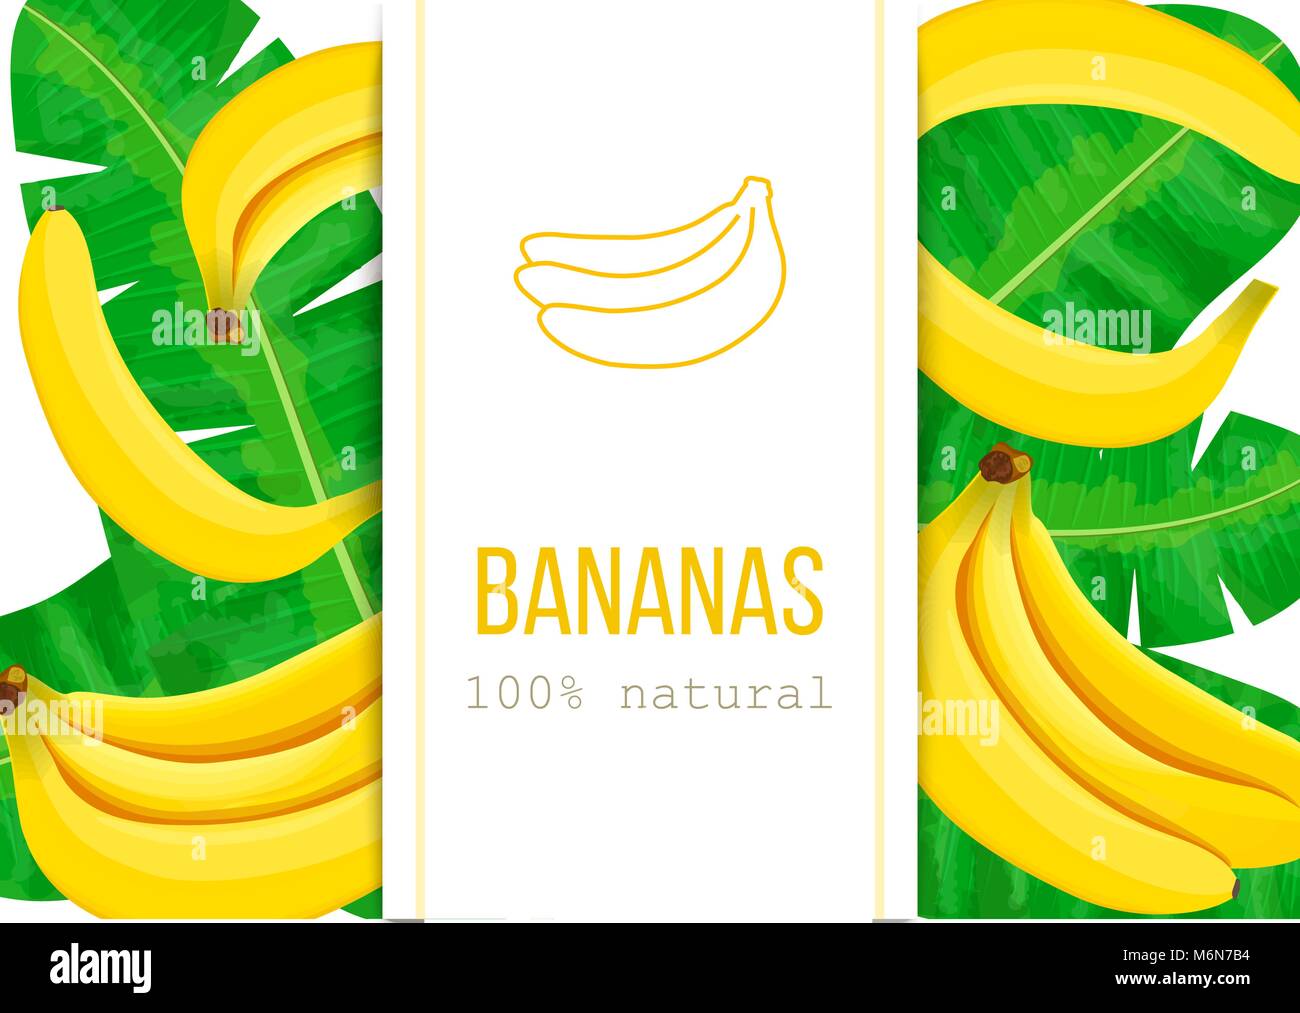 Ripe Bananas and palm leaves with text 100 percent natural. Vertical stripe label. Vector illustration with tropic motif Stock Vector